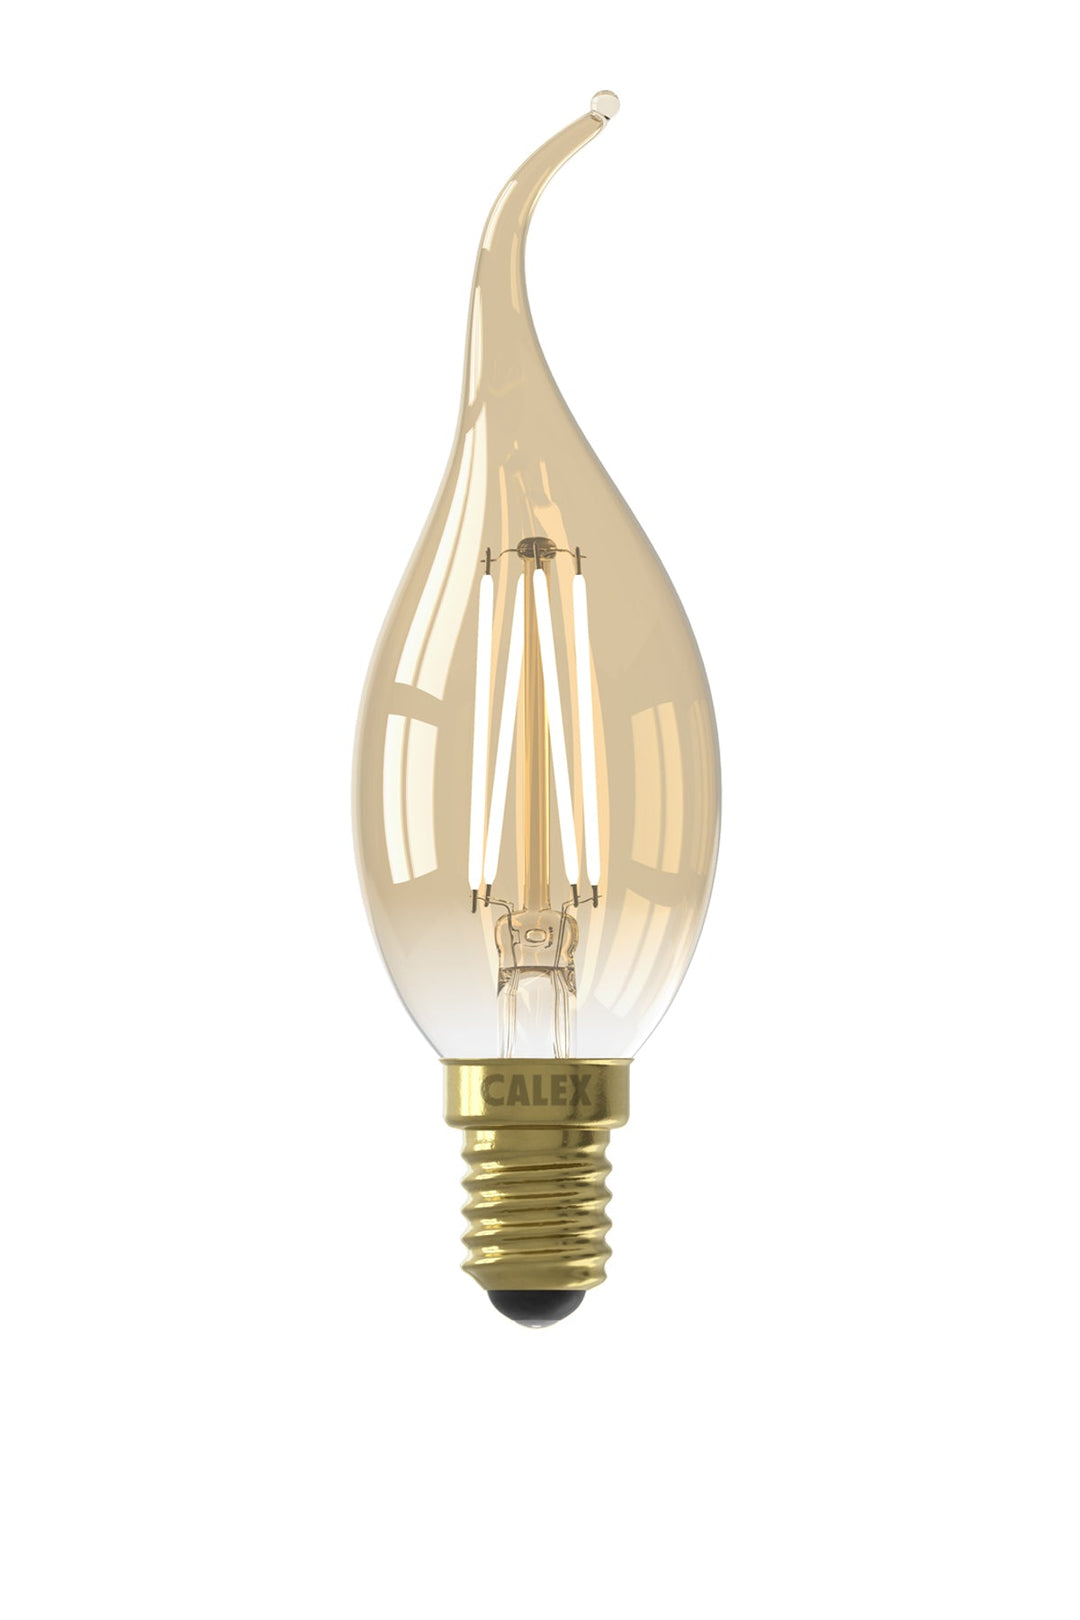 Calex LED Functional Filament Candle Lamp B35, Clear, E27, Dimmable 1101006000